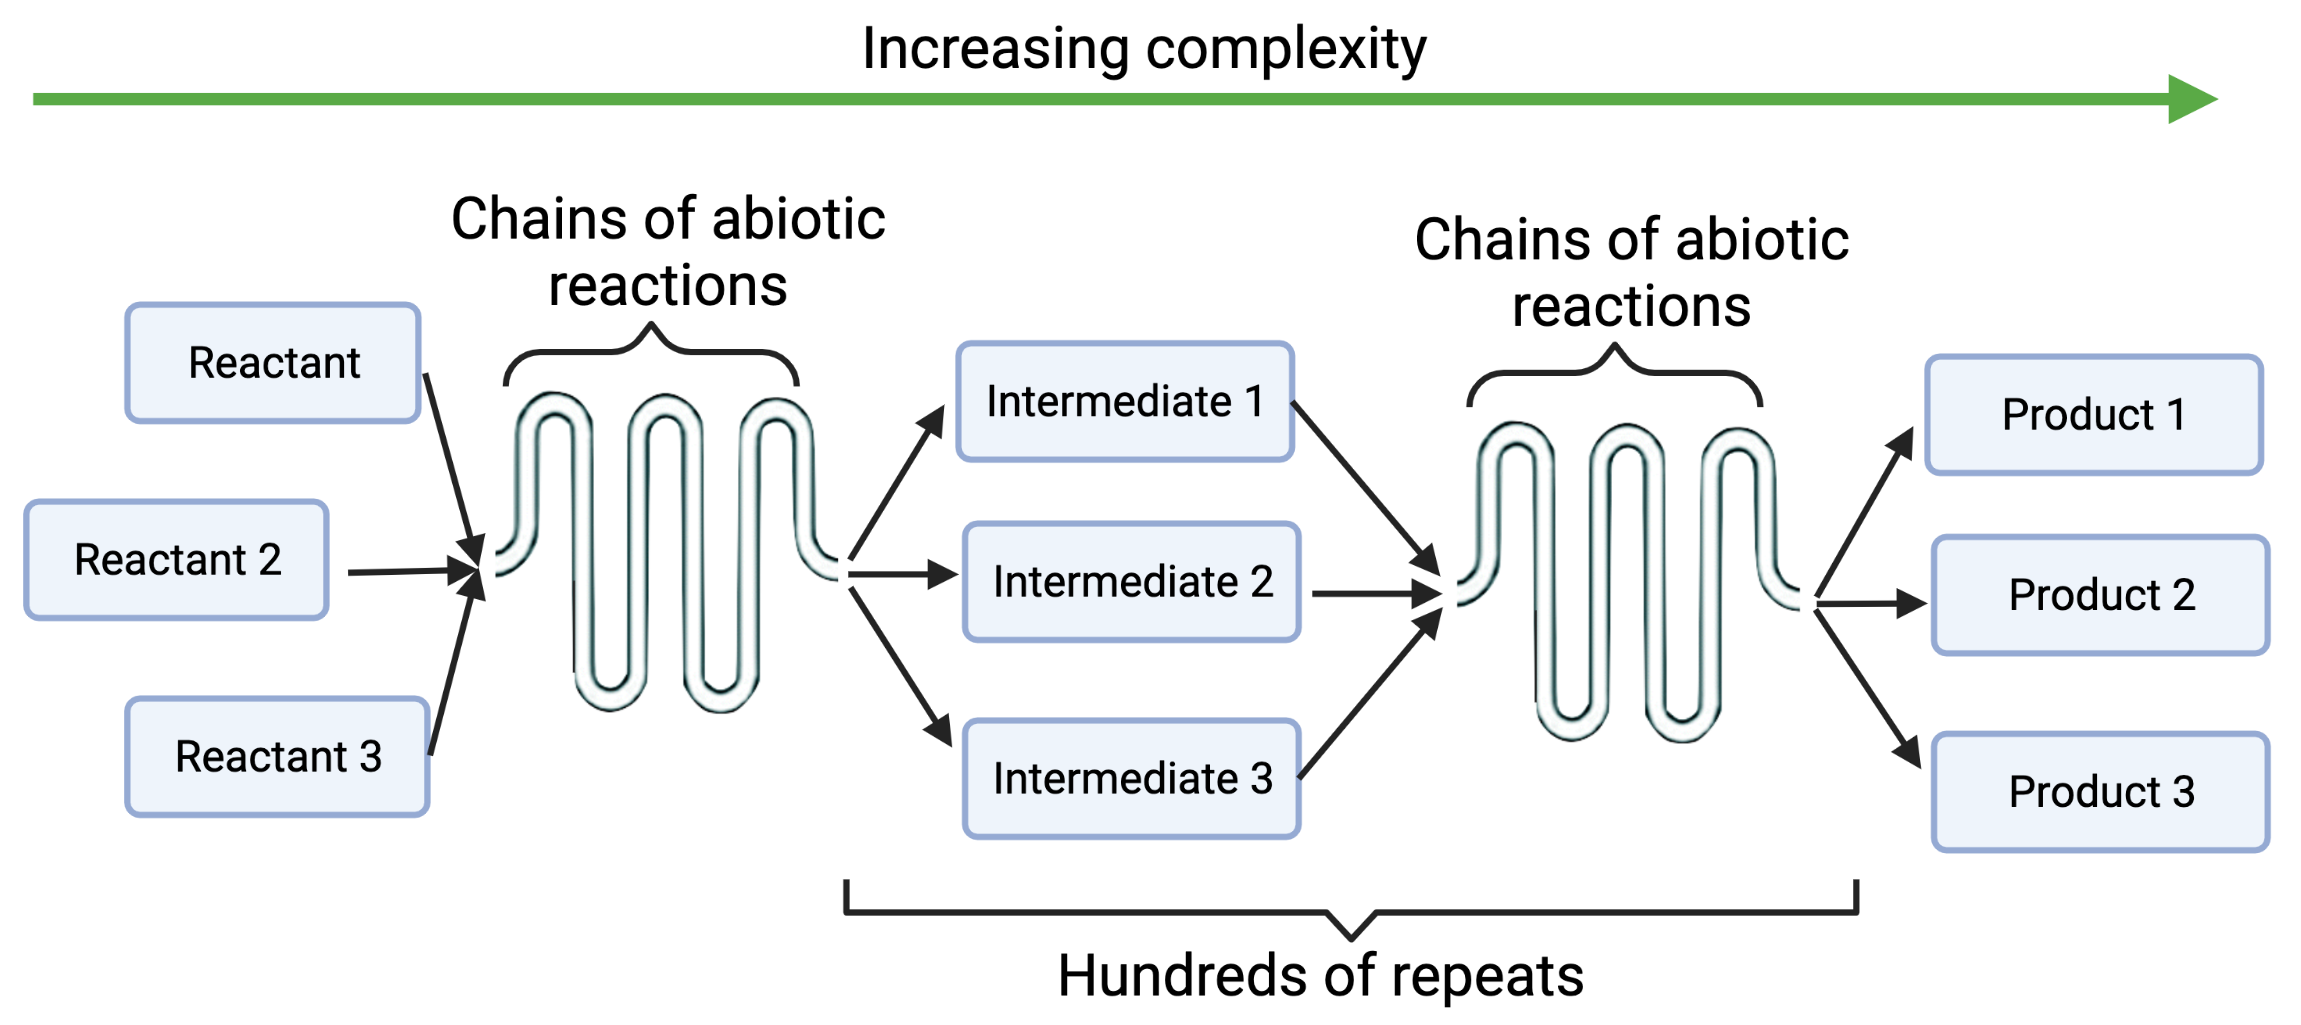 Increasing complexity arrow points to the right. Reactants 1, 2, and 3 converge and undergo chains of abiotic reactions to create Intermediates 1, 2, and 3, which then undergo further Chains of abiotic reactions, which, after "Hundreds of repeats", produce Products 1, 2, and 3.